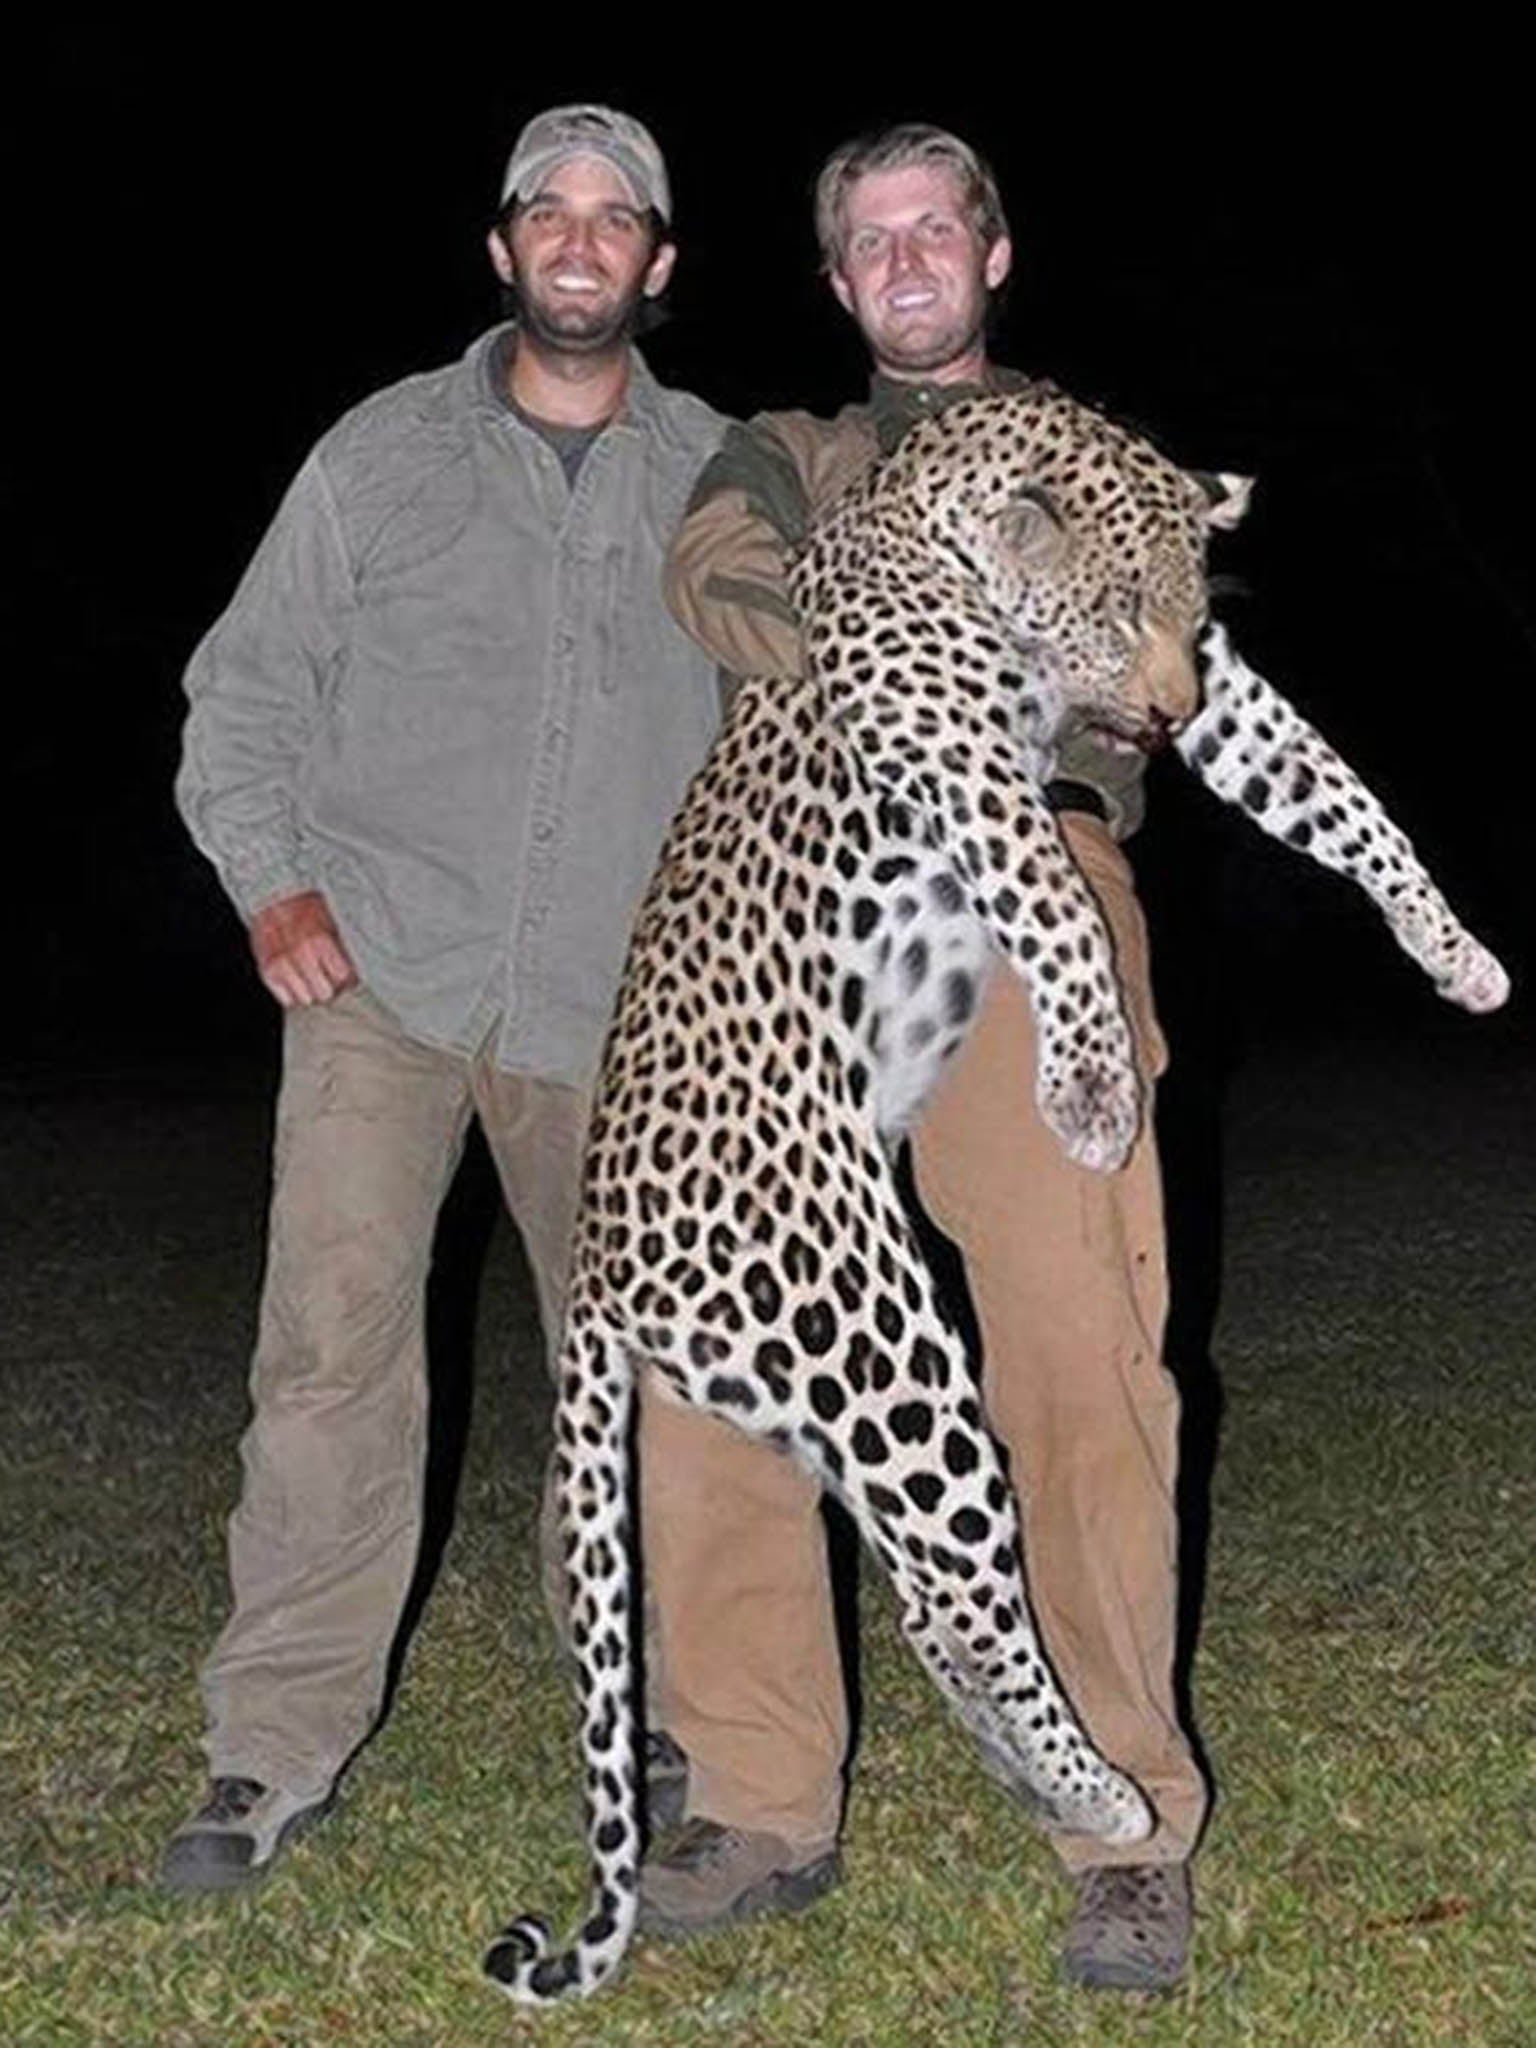 Donald Trump Jr and Eric Trump, the president’s sons, are seen here with a leopard they hunted in 2011 in Zimbabwe